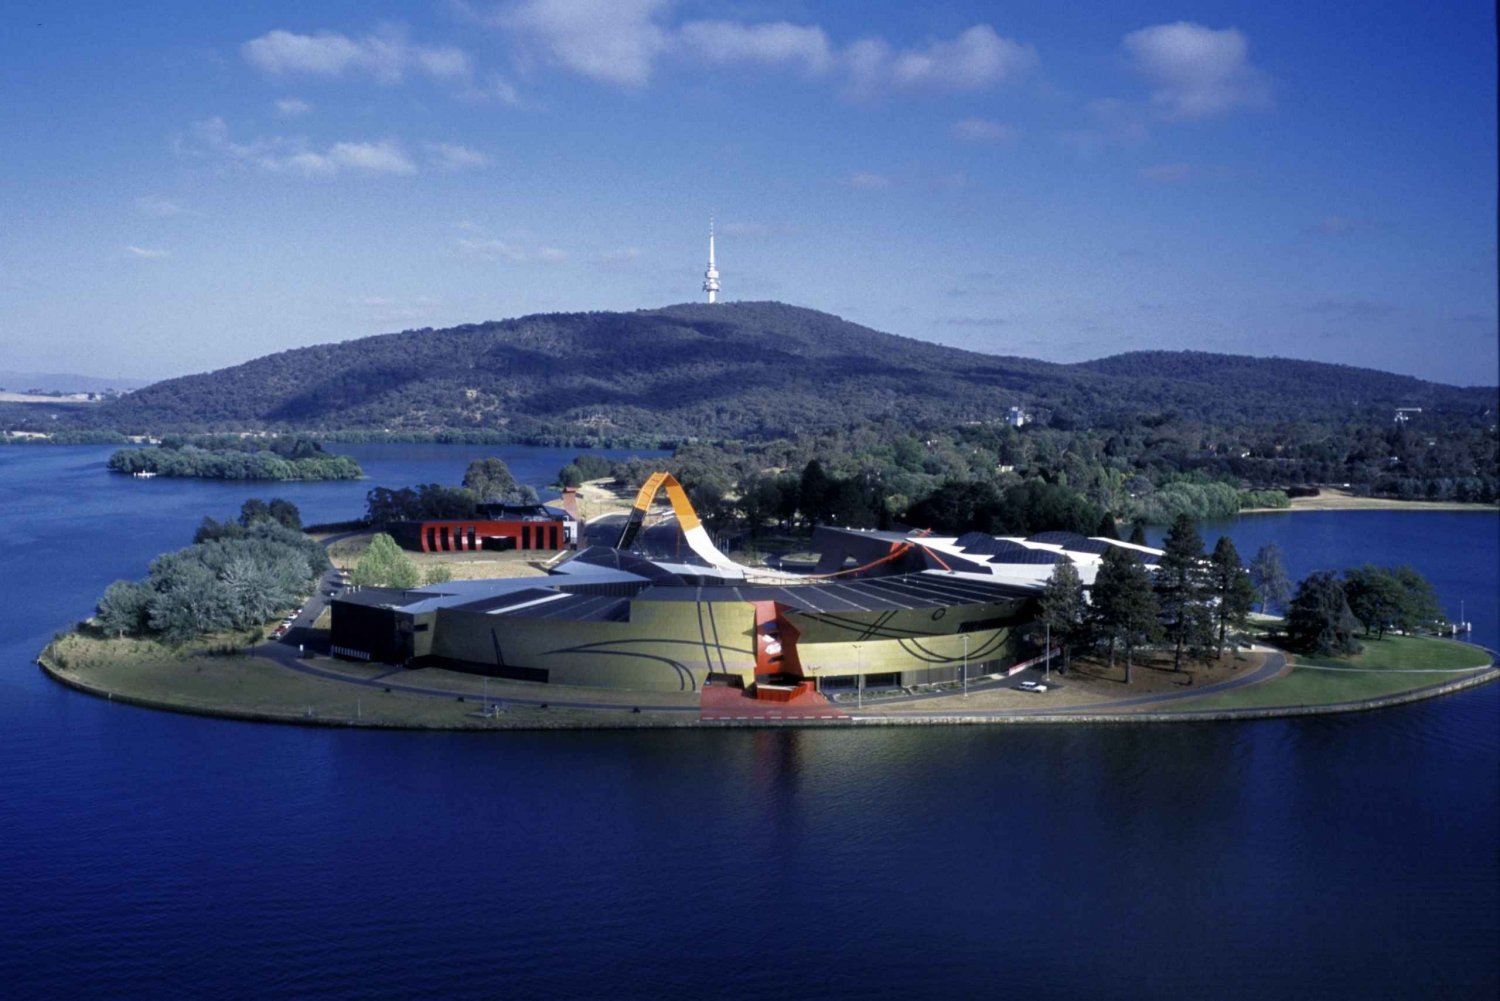 From Sydney: Canberra City Highlights and Floriade Day Tour